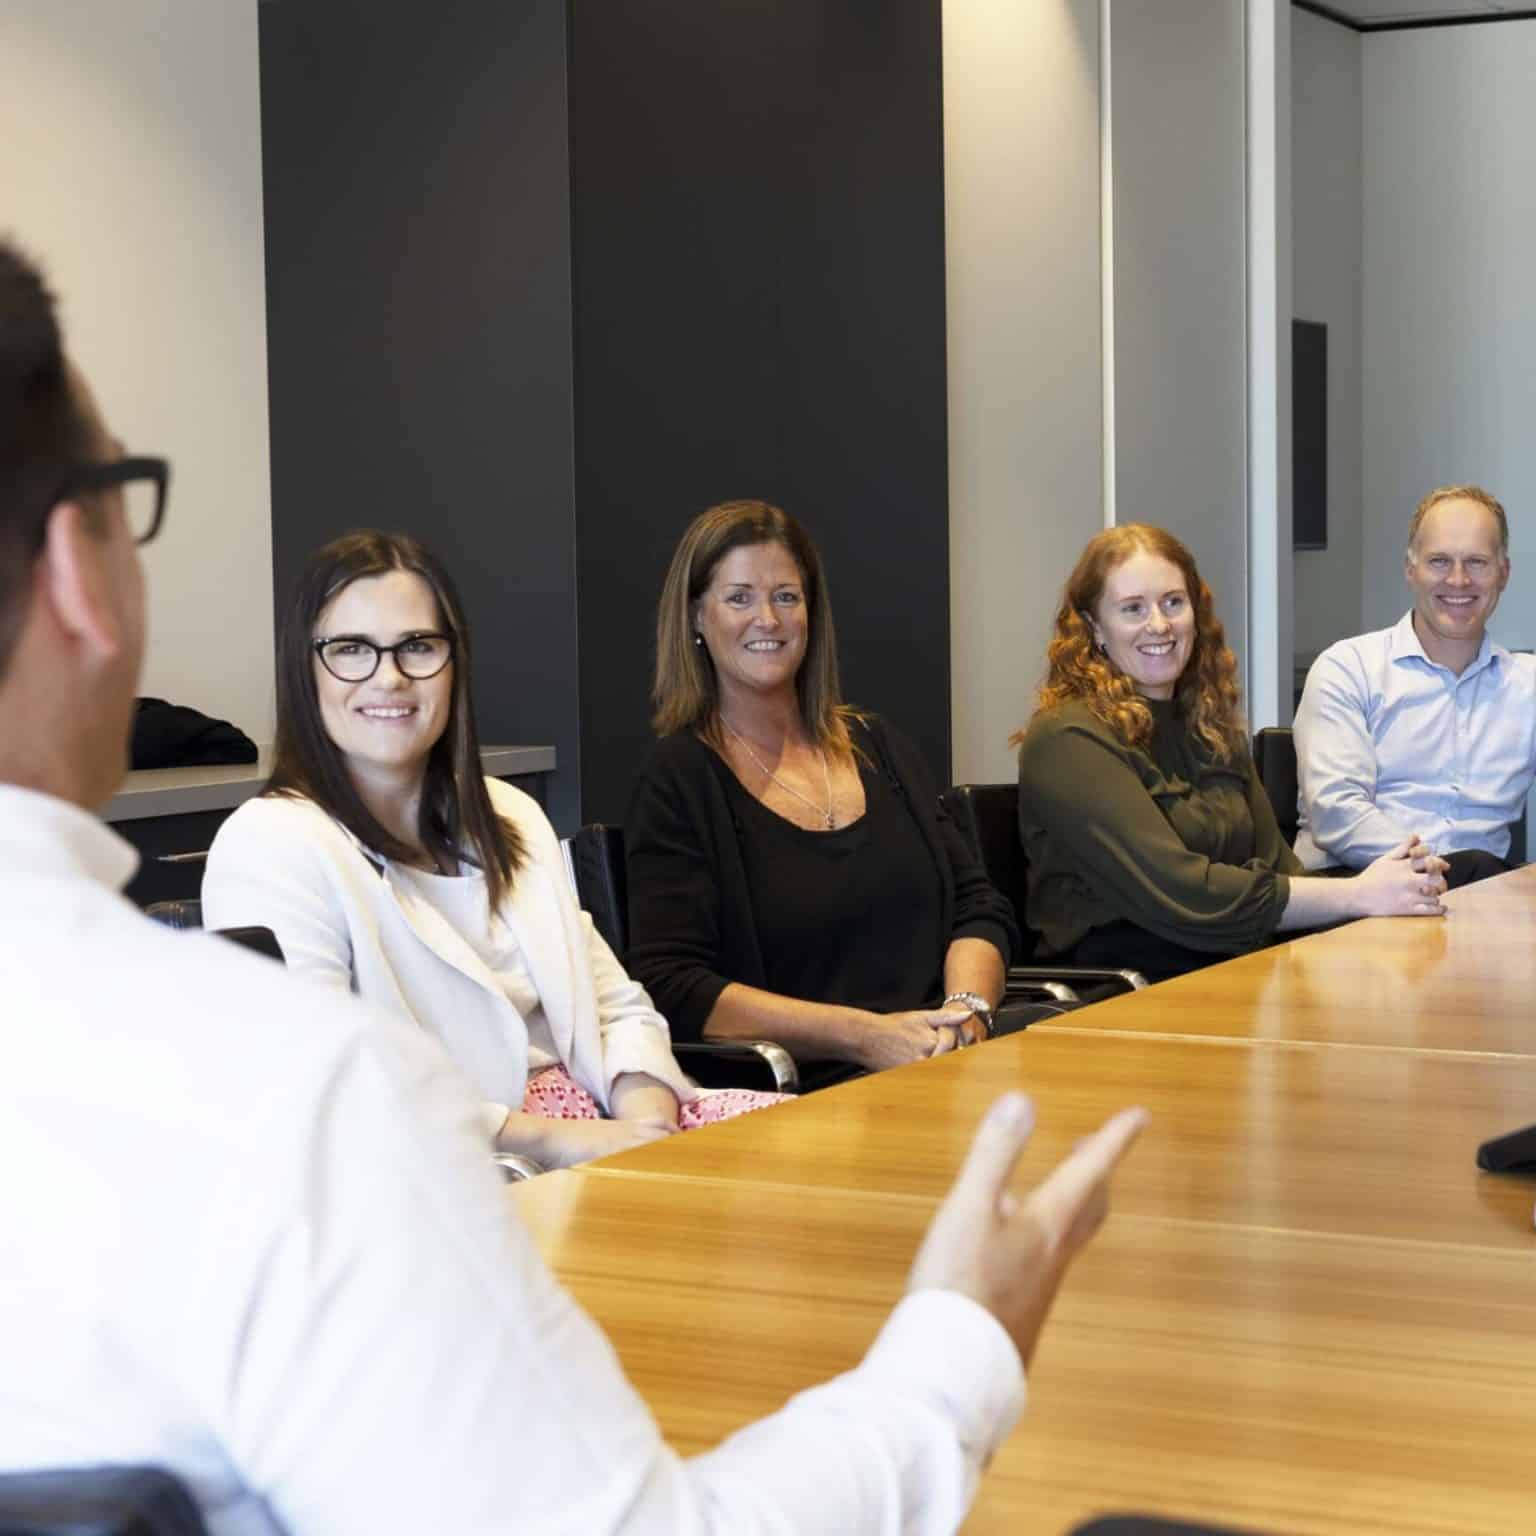 Experts in meeting — McCulloch & Partners Chartered Accountants and Business Advisors in New Zealand